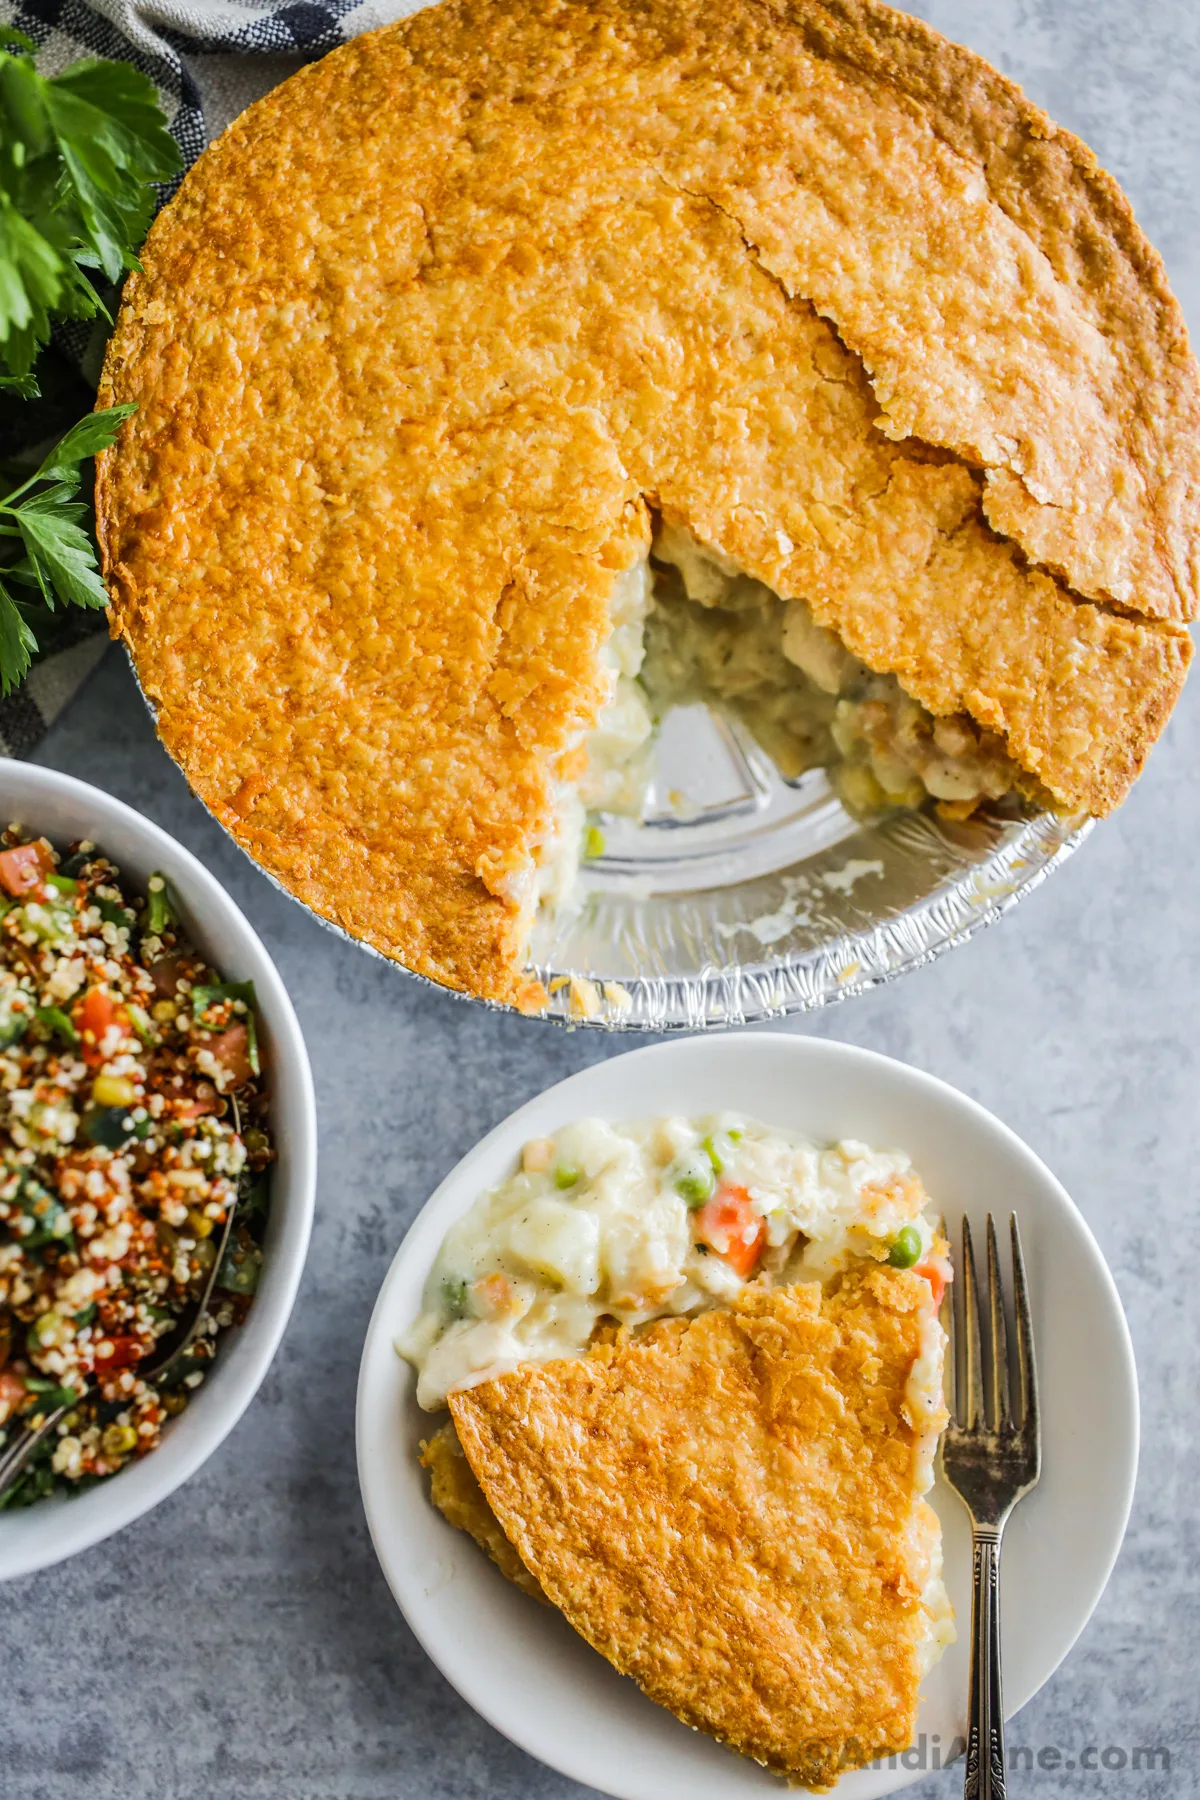 A slice of costco chicken pot pie on a plate with the full pie and a bowl of quinoa salad beside it.